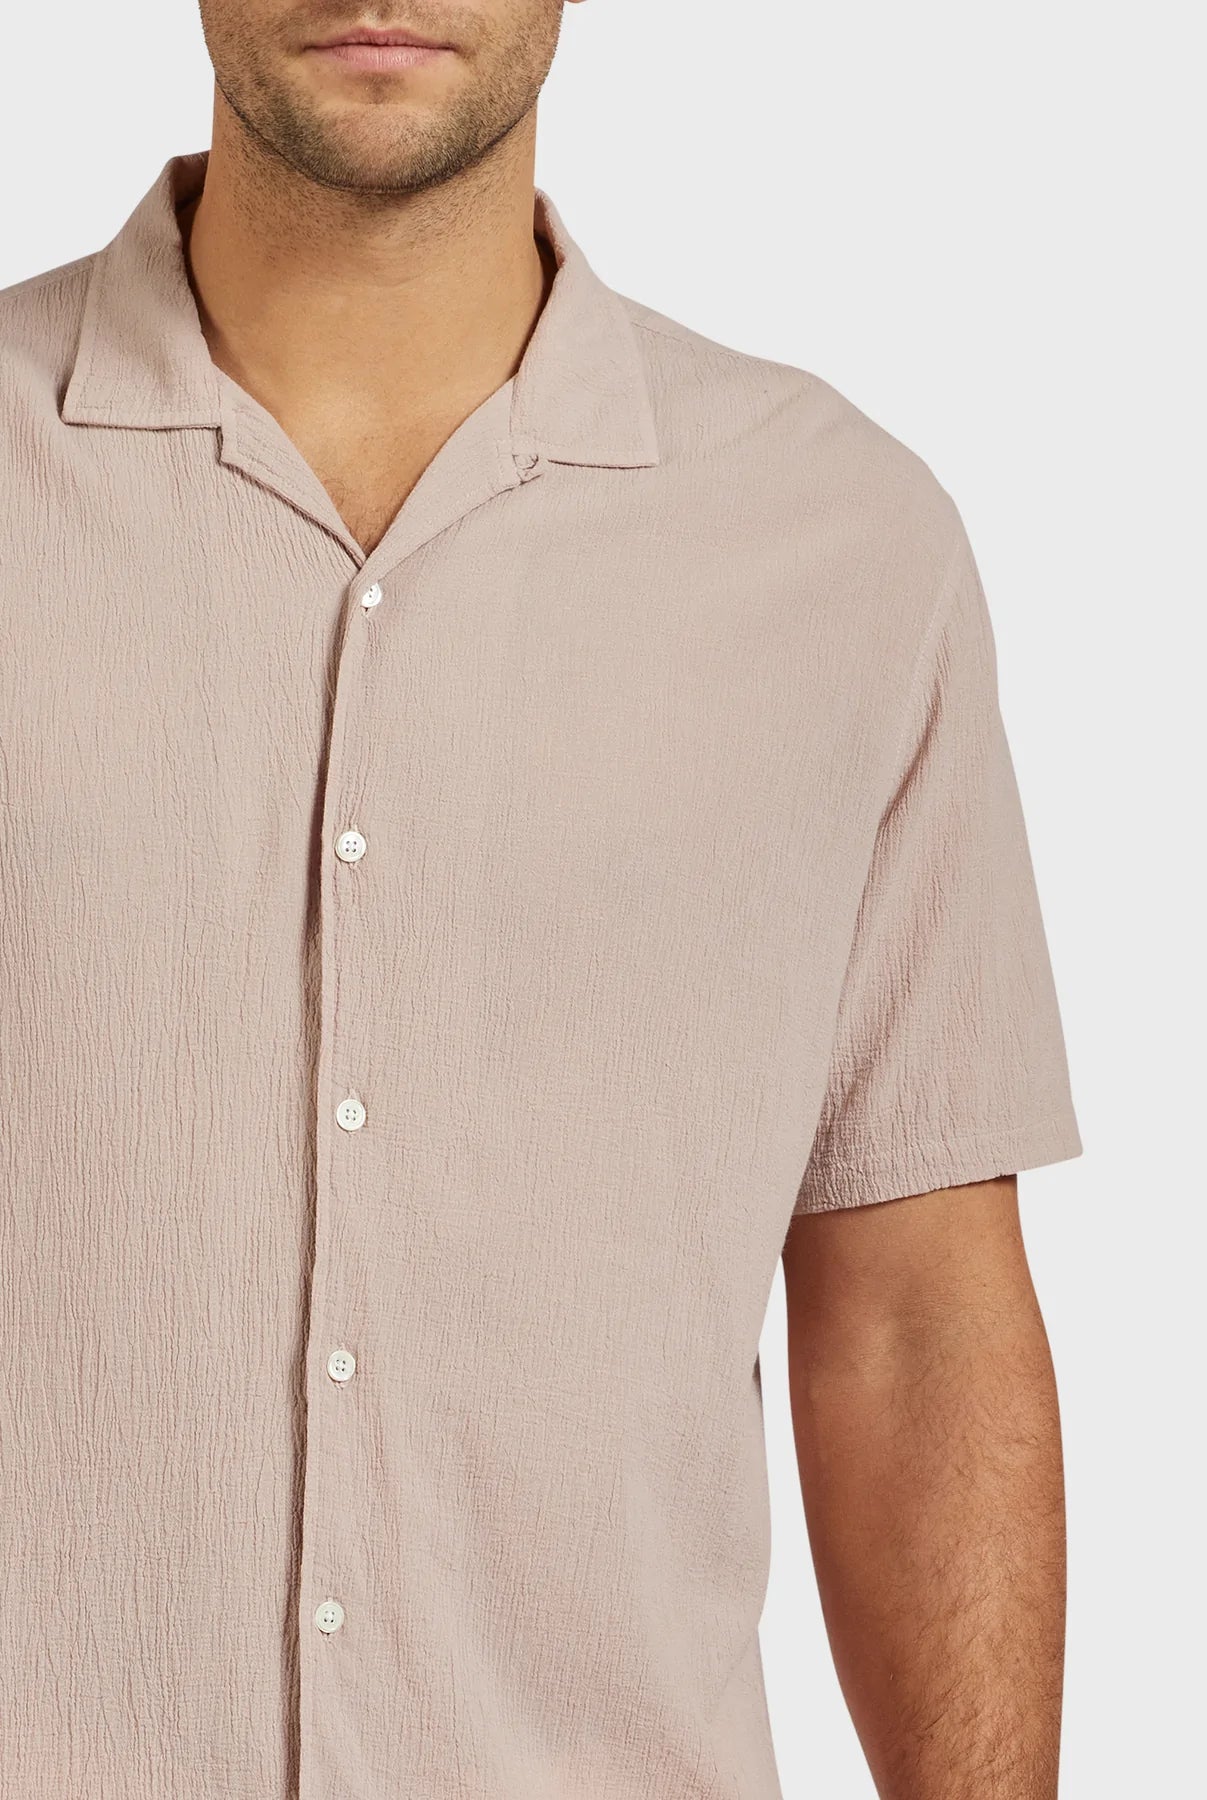 Bedford Short Sleeve Shirt in Dusty Pink